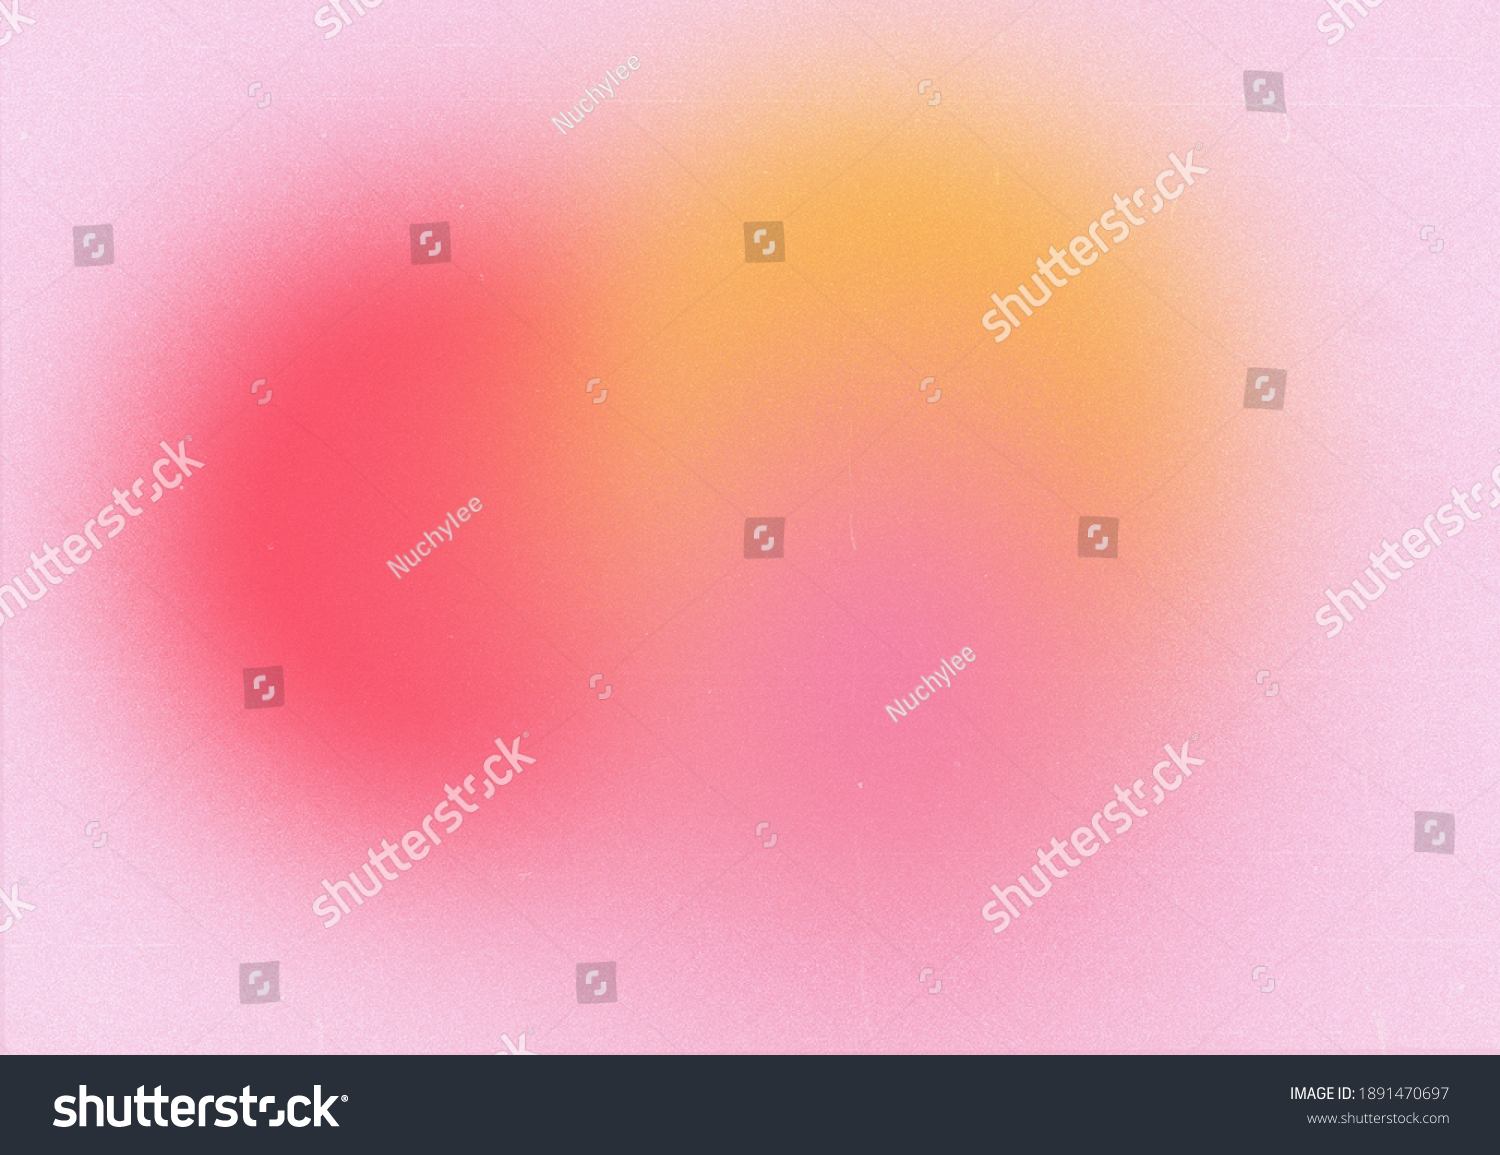 Abstract gradient blurred pattern colorful with grain noise effect background, for product design and social media #1891470697